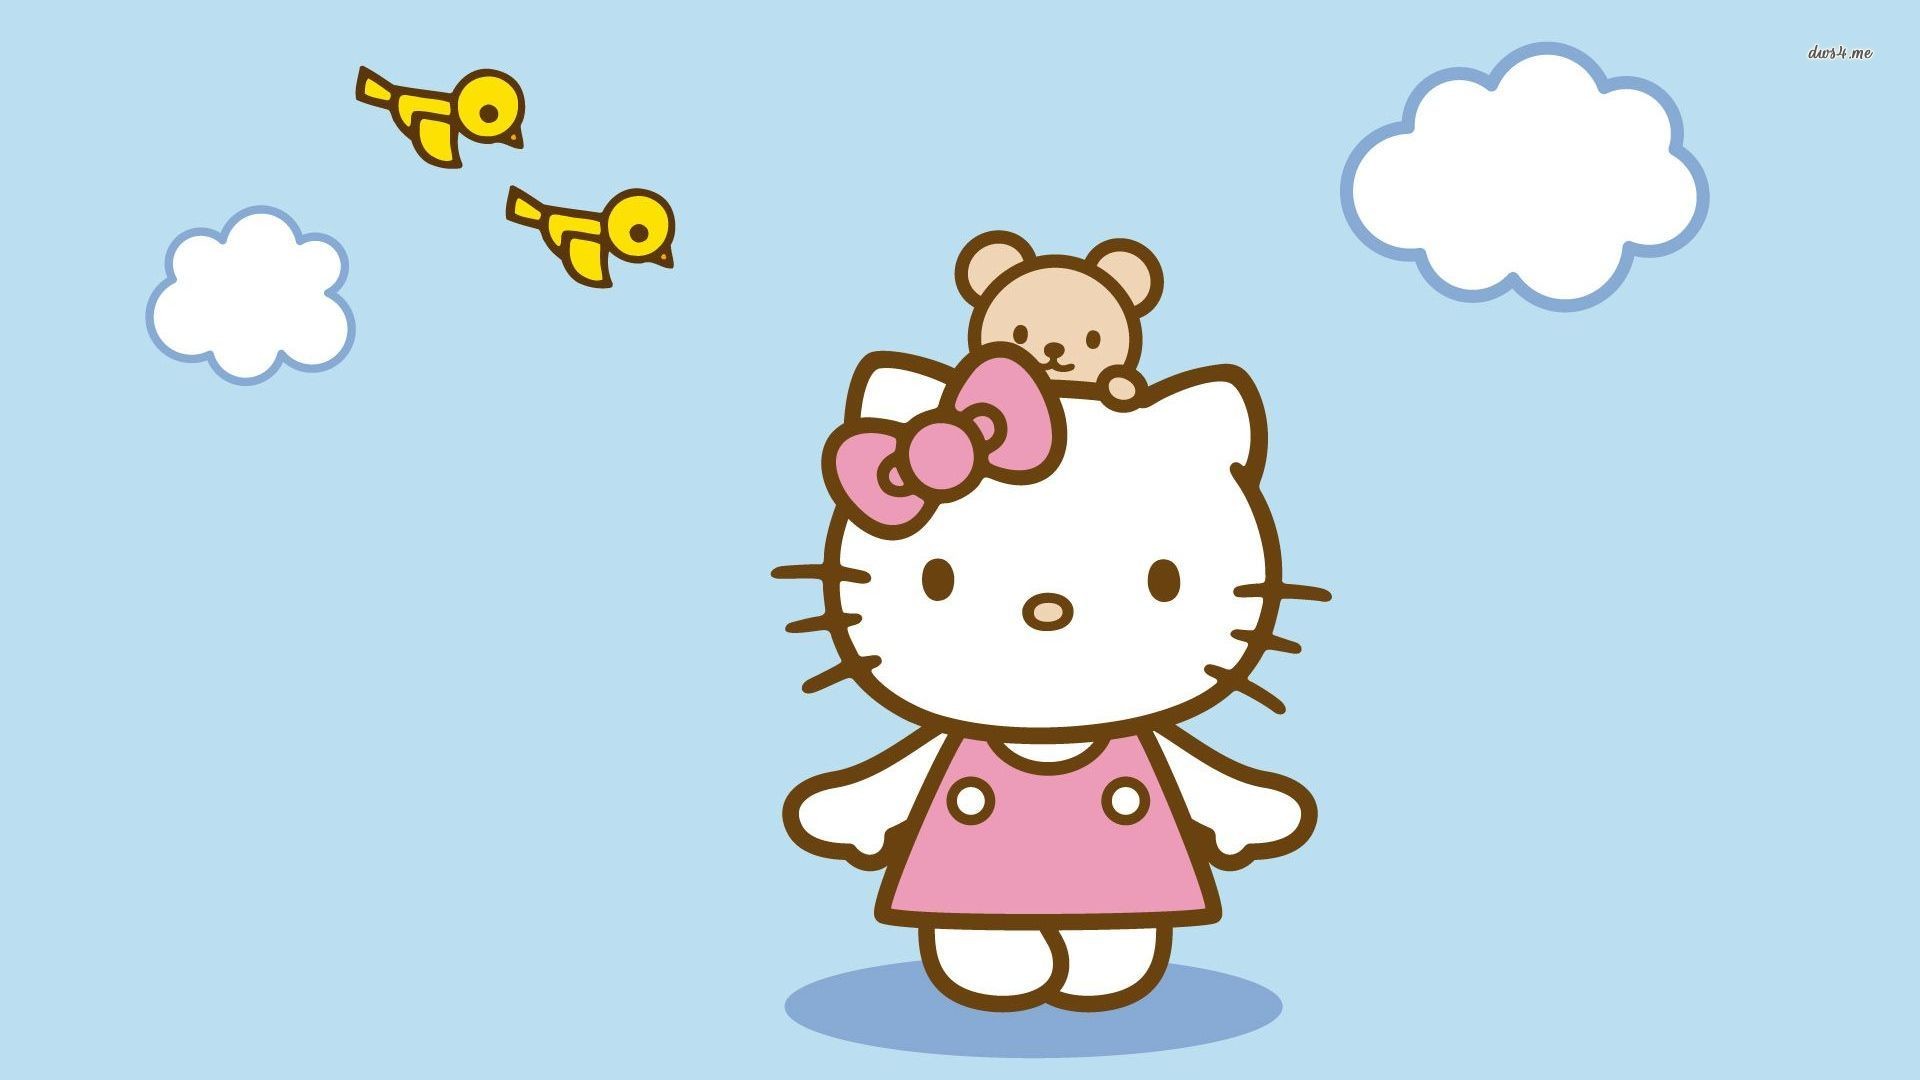 Hd Wallpaper Hello Kitty 69 Images